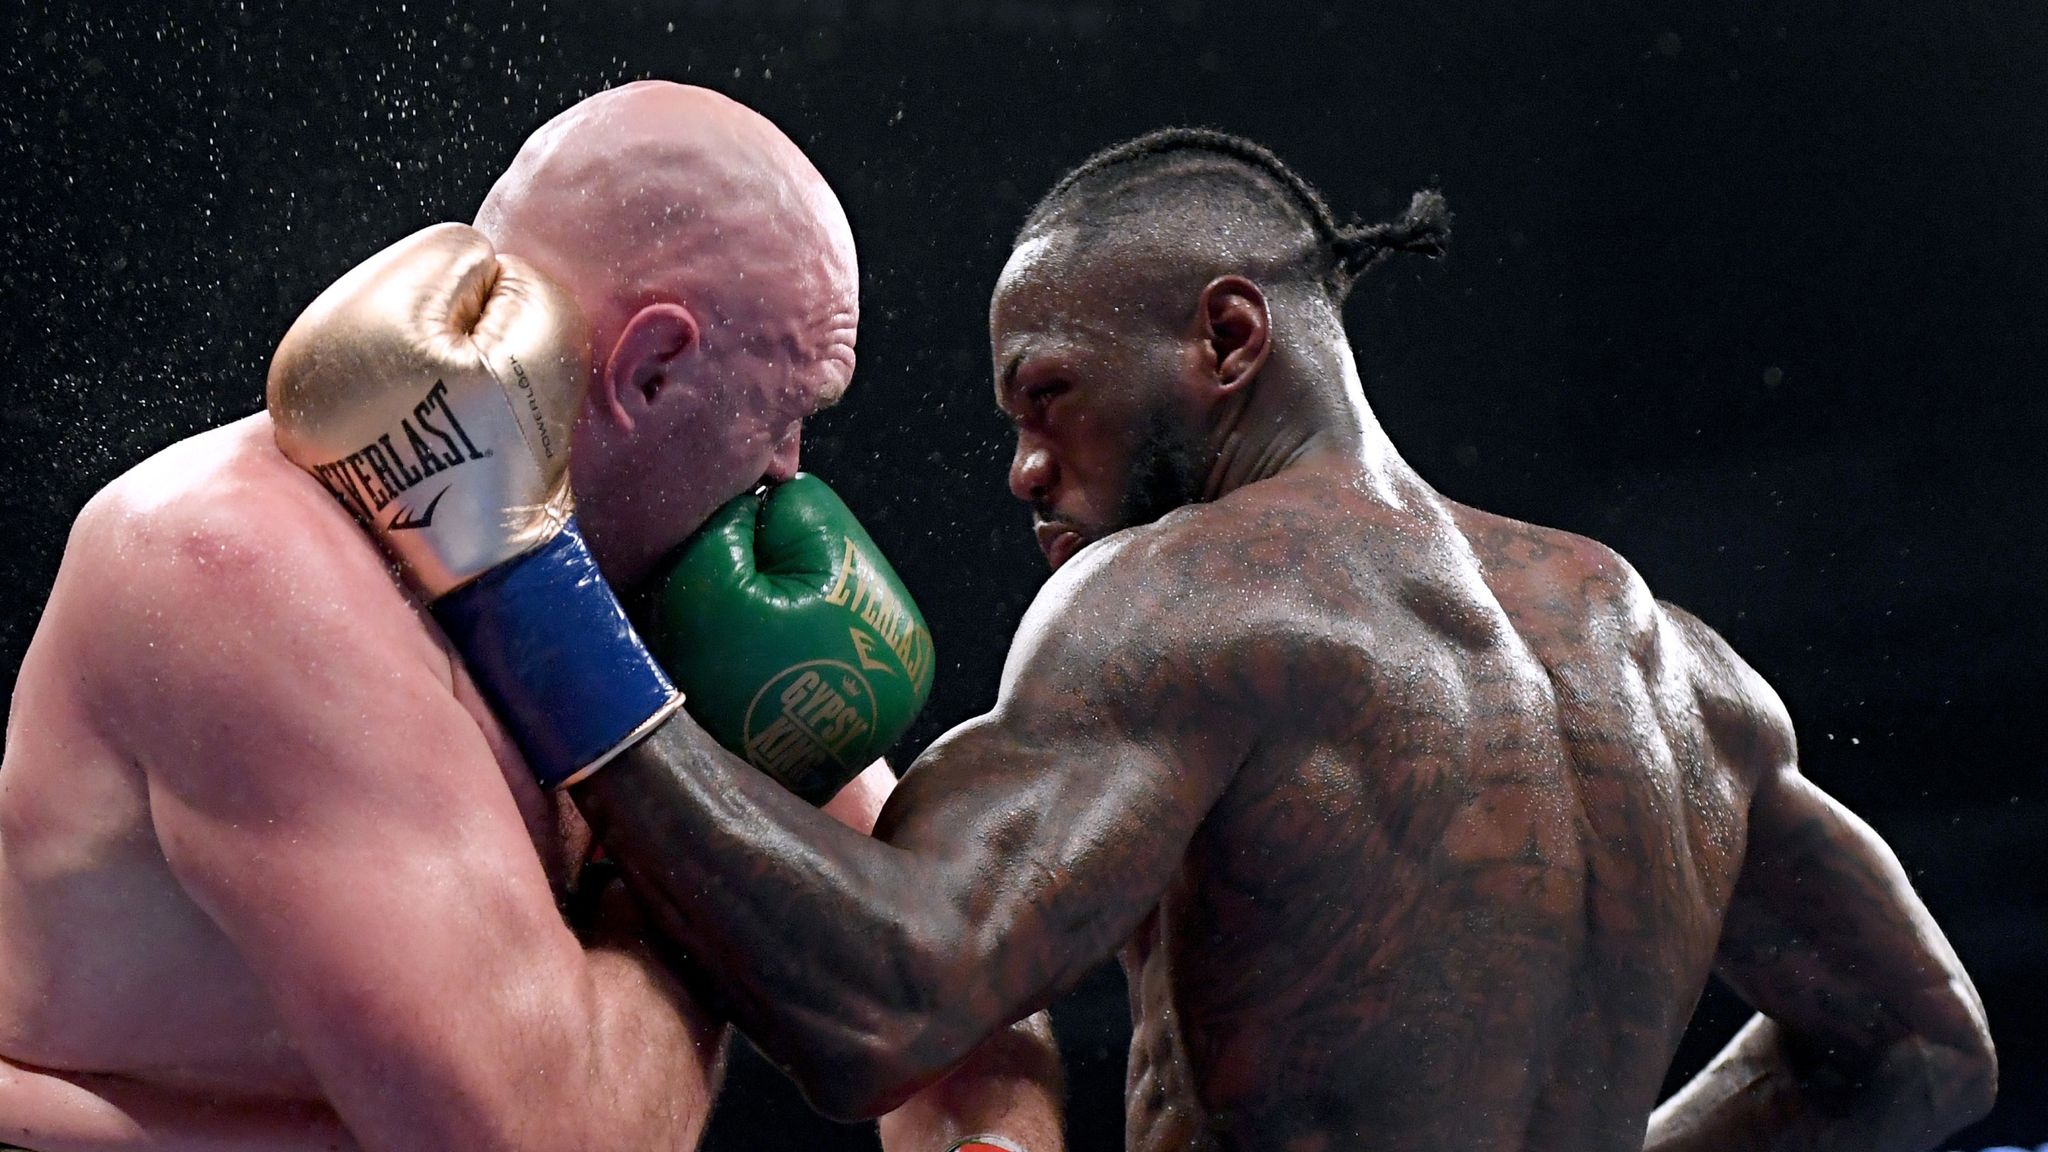 Deontay Wilder and Tyson Fury told to organize rematch